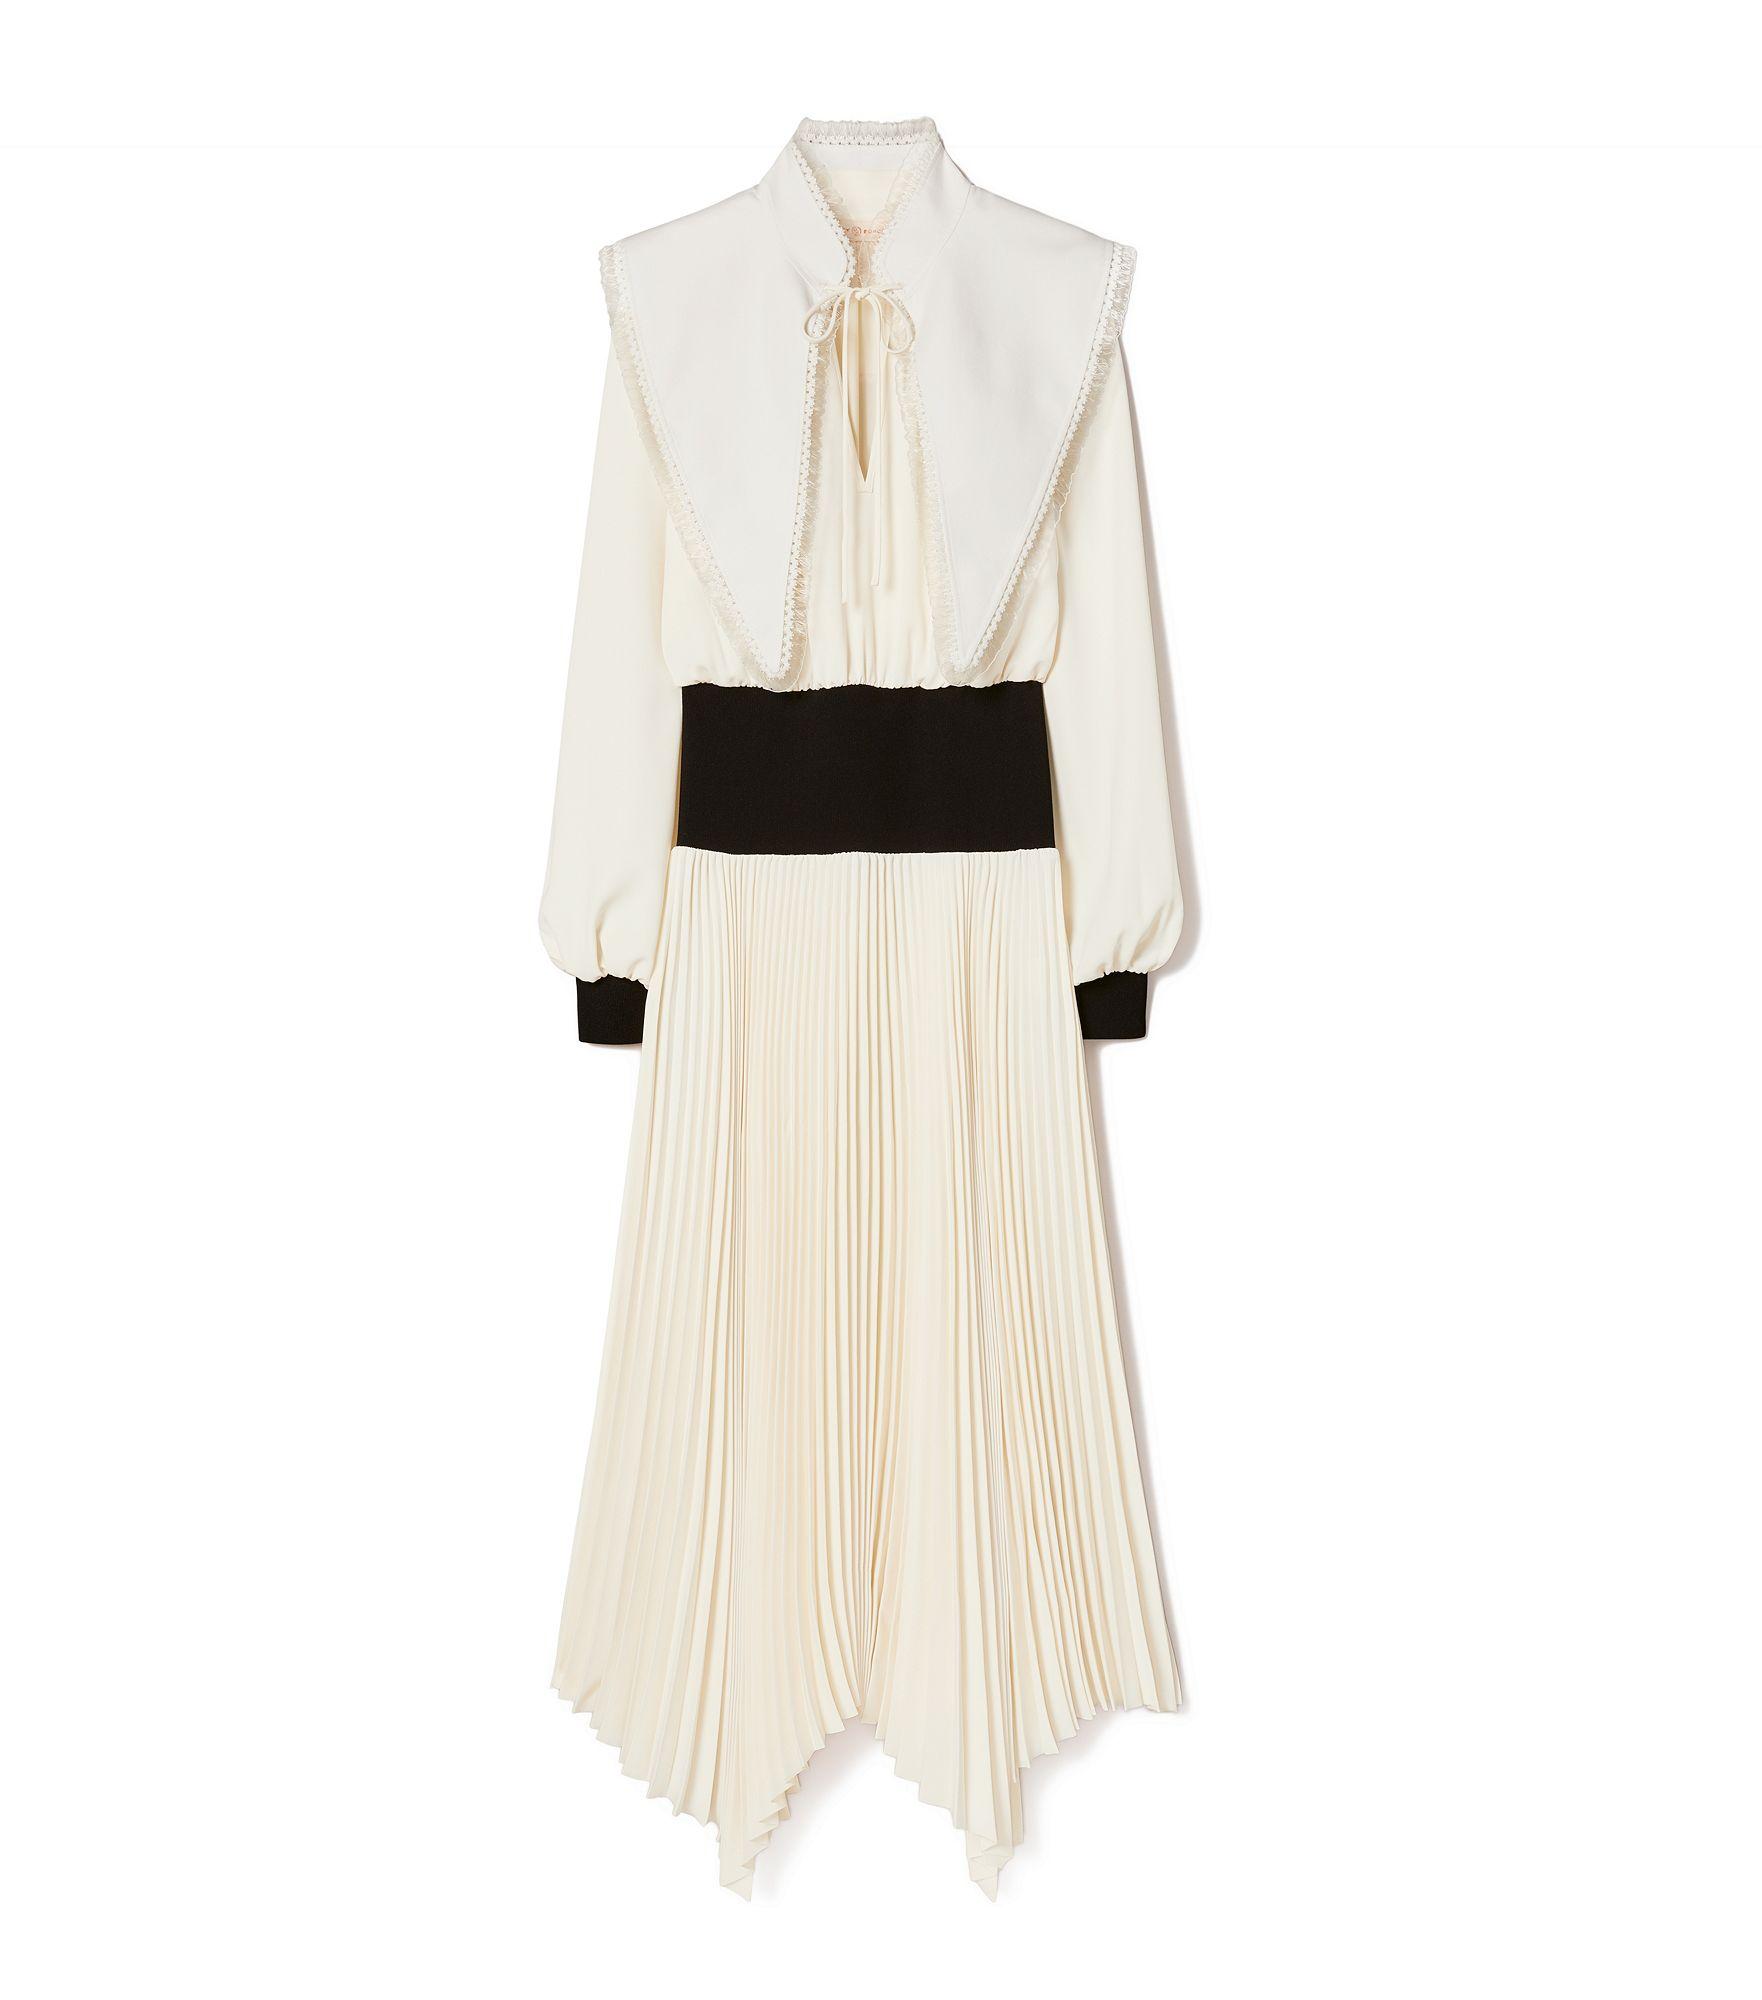 Tory Burch Removable Collar Dress in Natural | Lyst